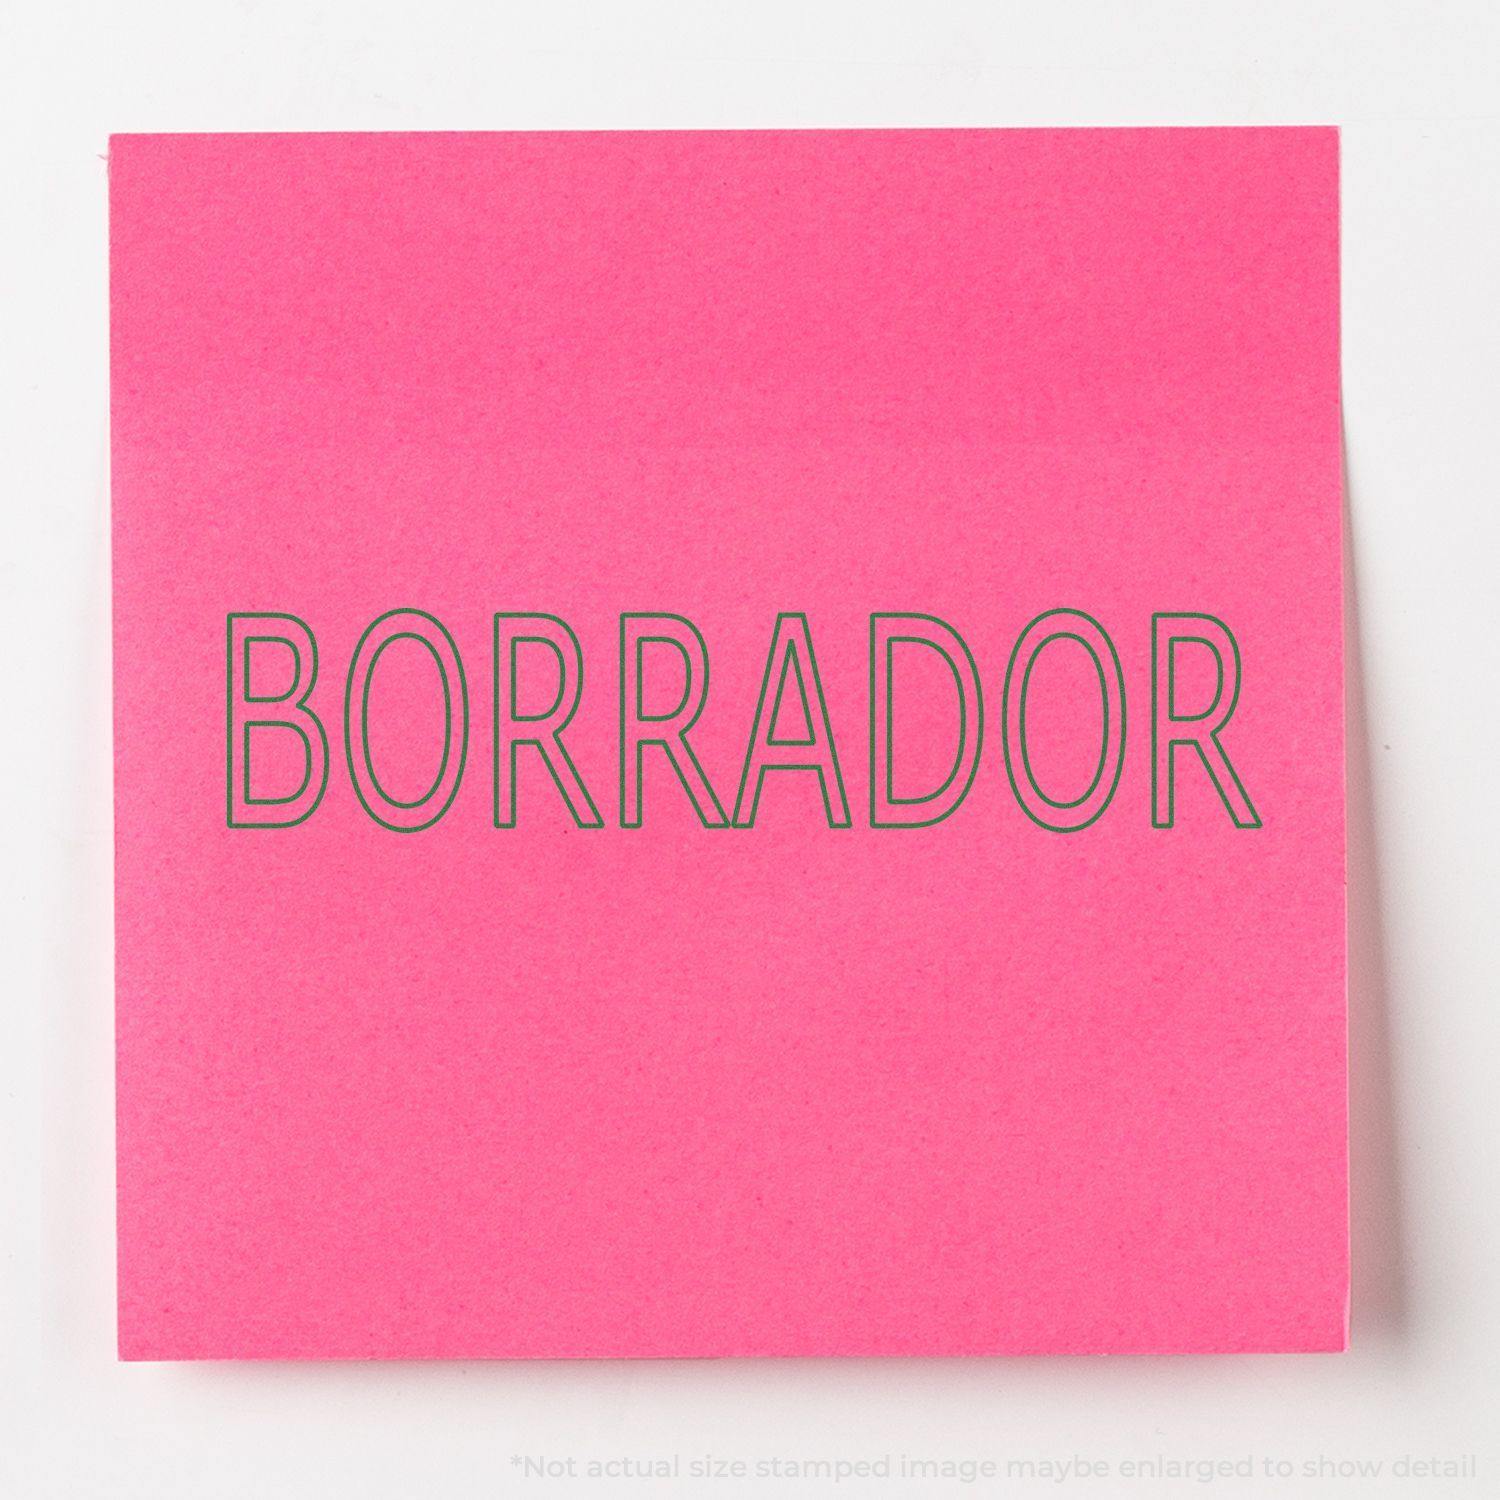 A stock office rubber stamp with a stamped image showing how the text "BORRADOR" in an outline font is displayed after stamping.